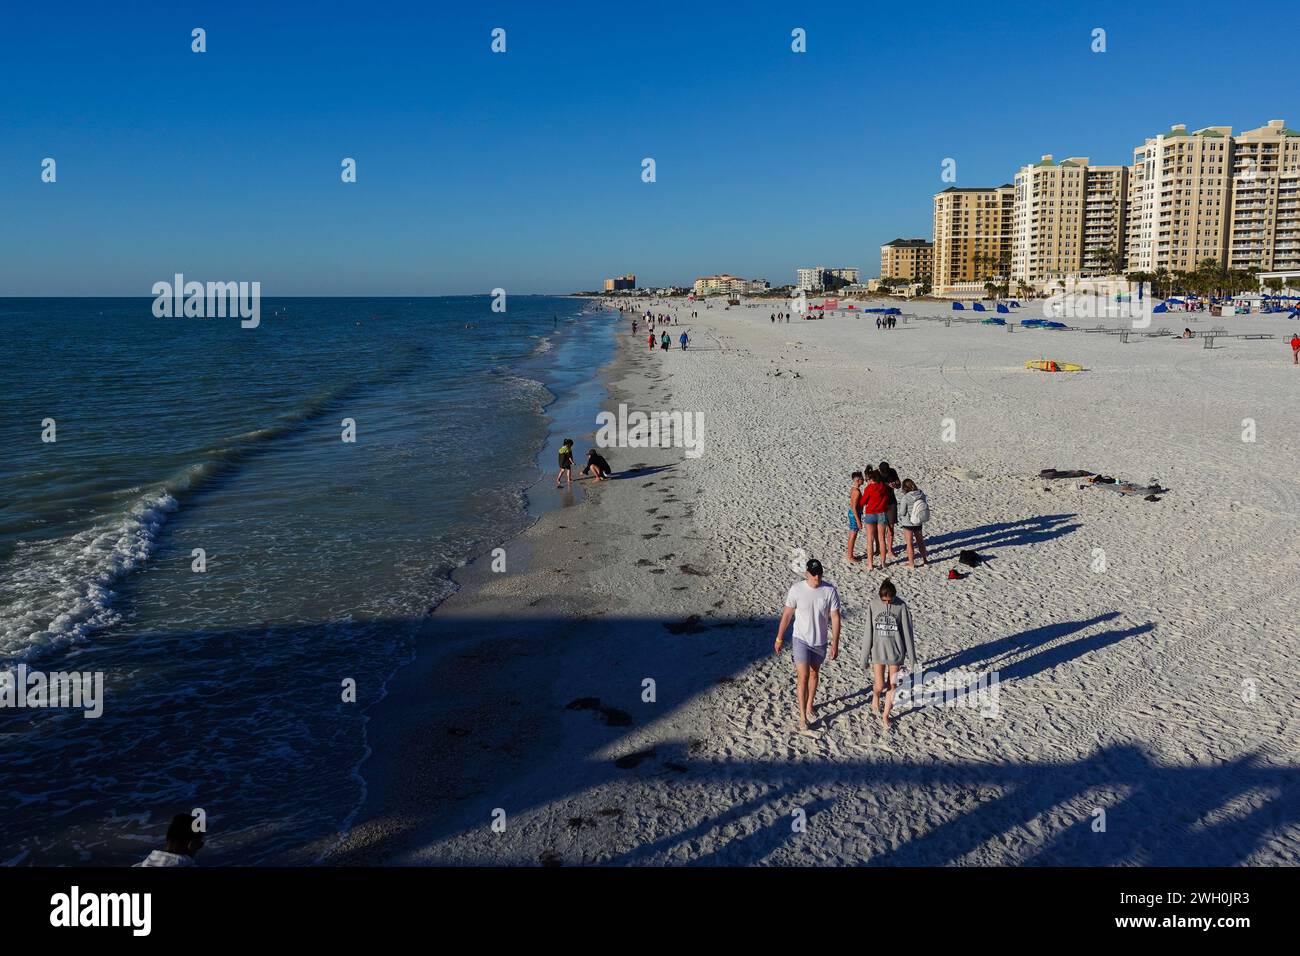 People strolling along the coastline at Clearwater Beach, Florida Stock Photo